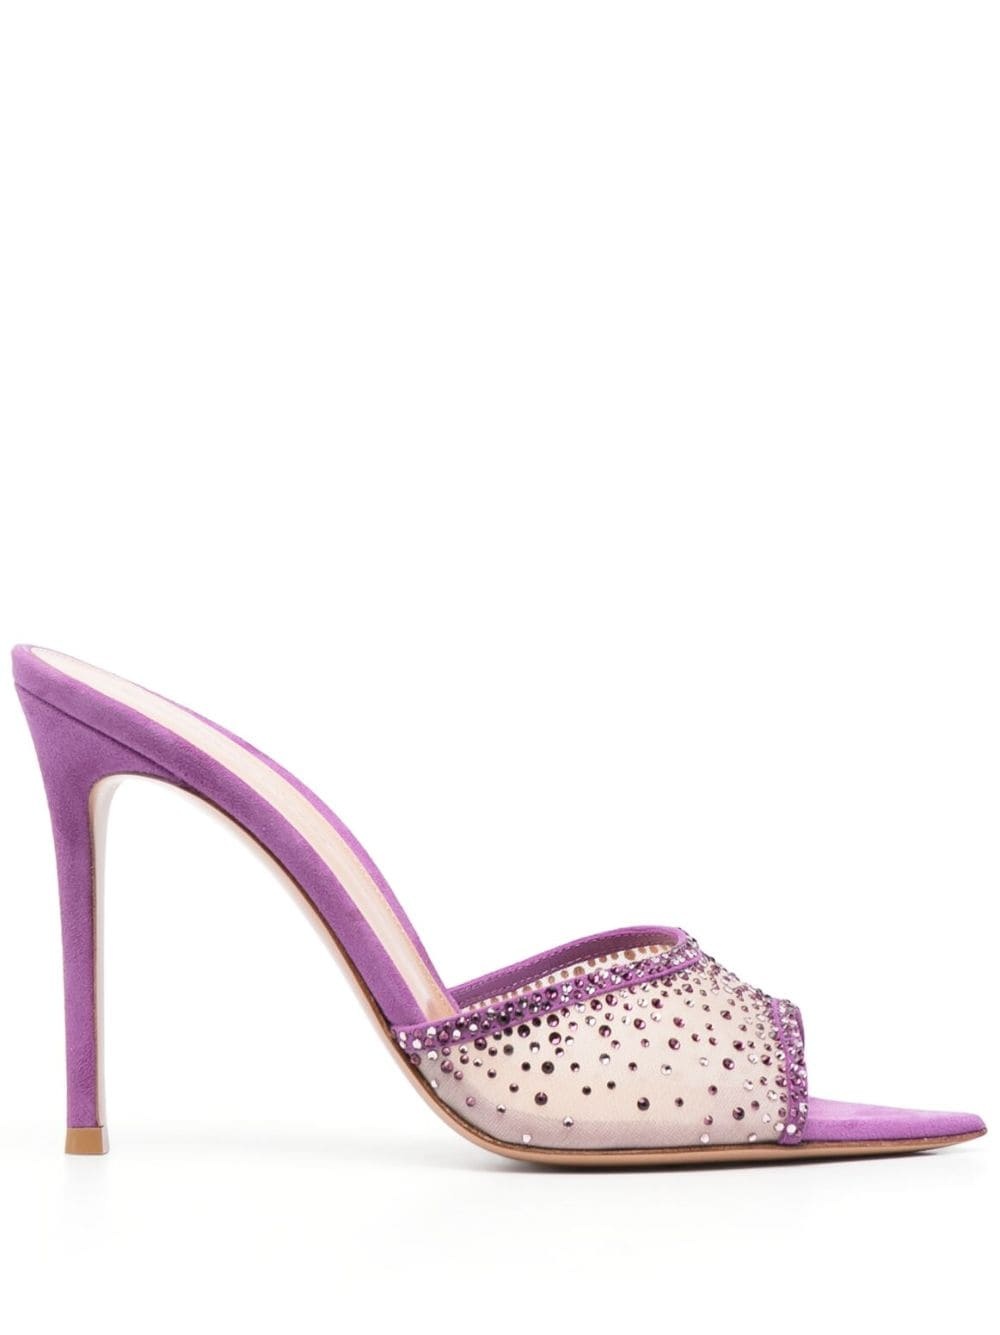 Gianvito Rossi Elle Embellished Mules in Pink